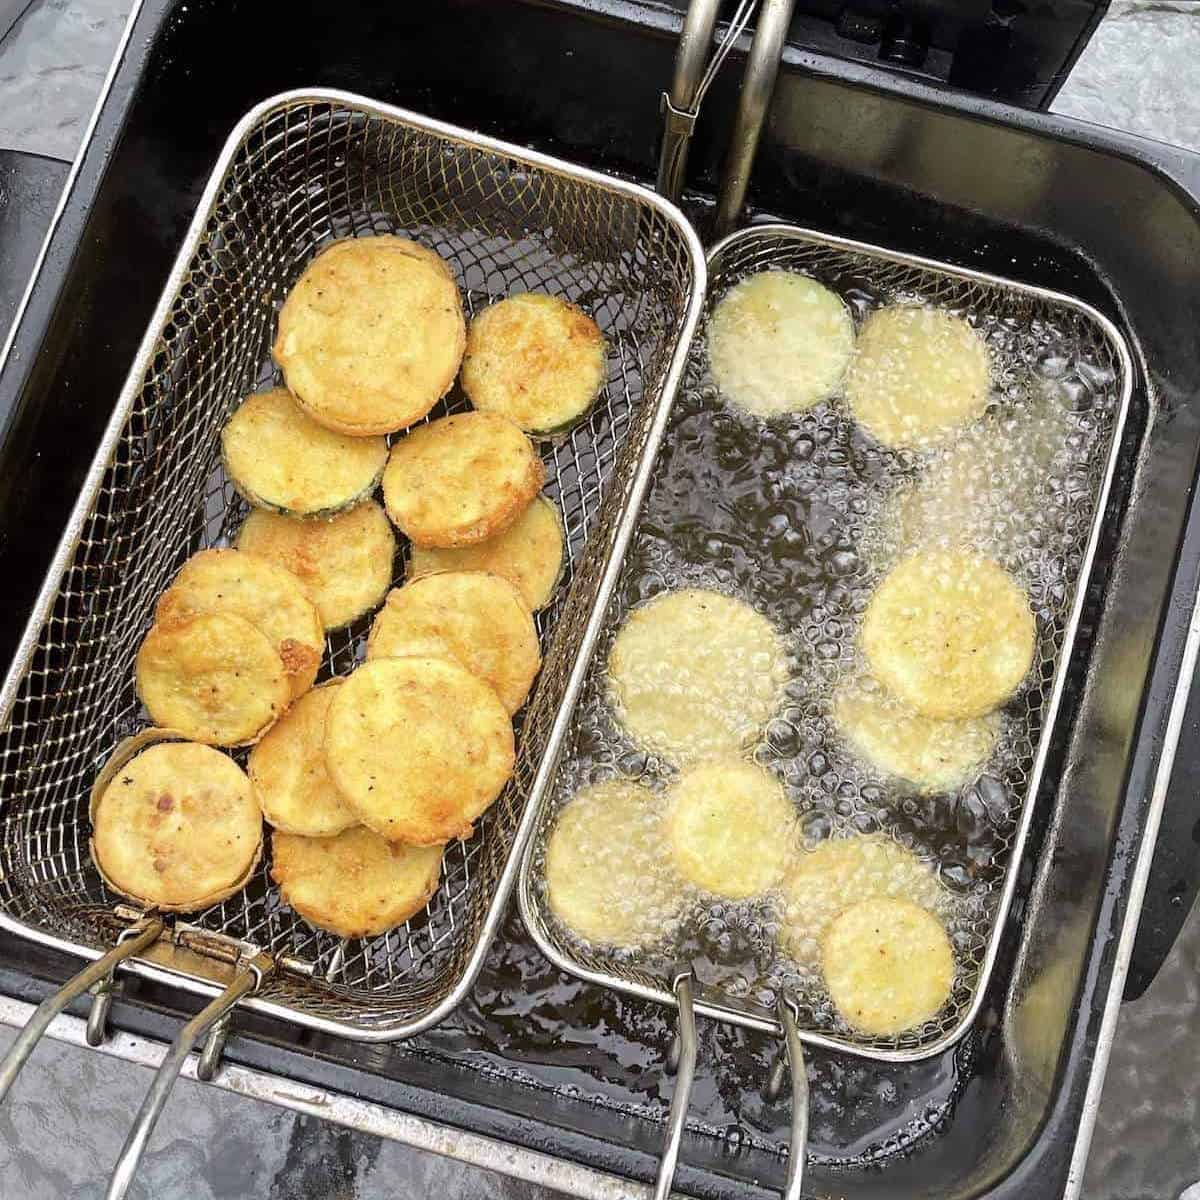 A deep fryer with two baskets of yellow squash and zucchini frying in it.